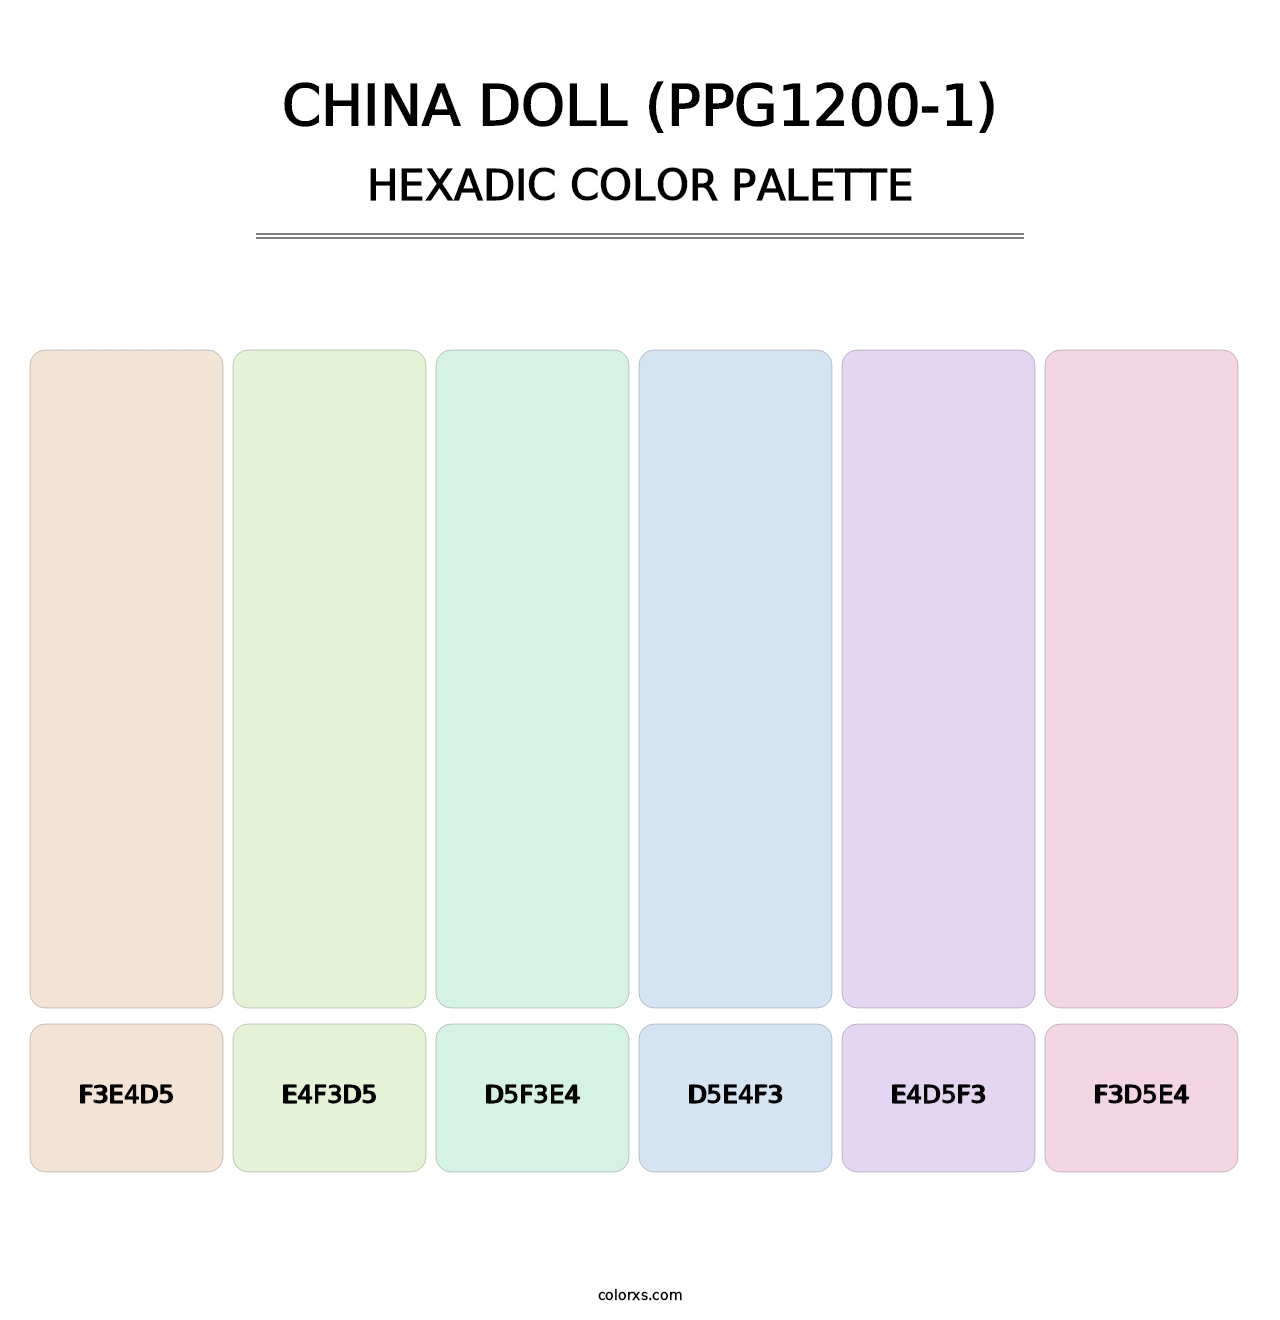 China Doll (PPG1200-1) - Hexadic Color Palette